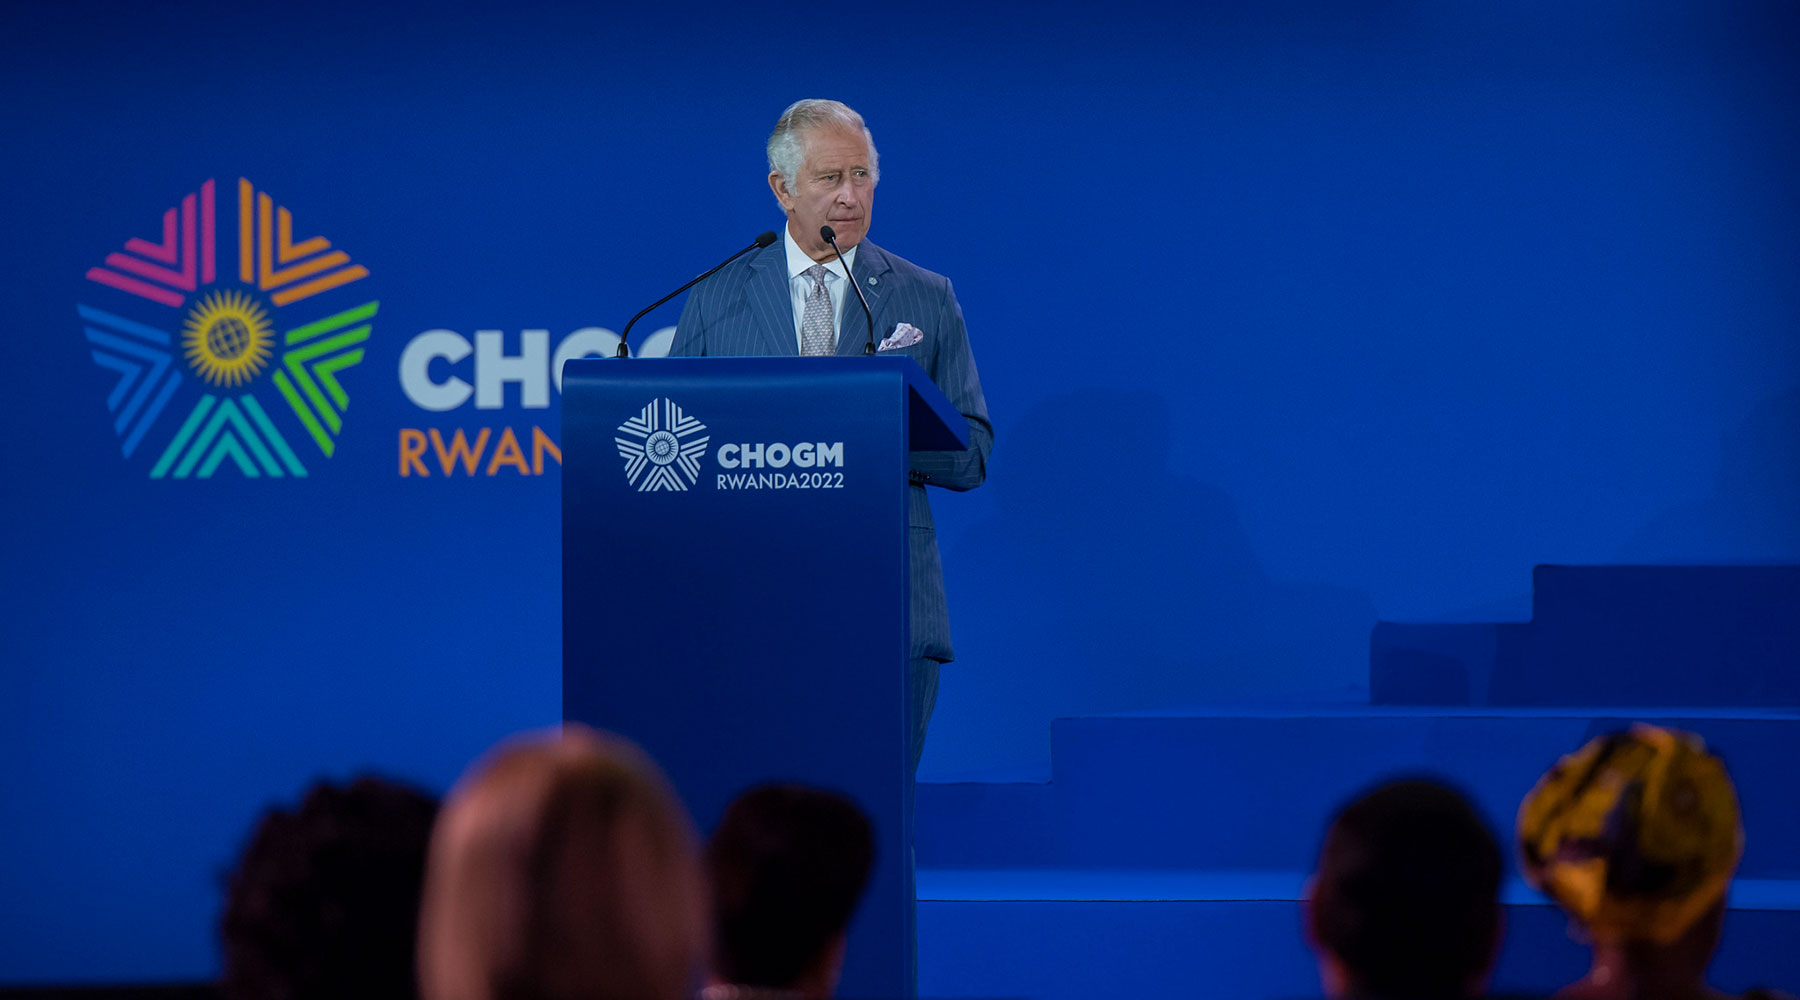 Prince Charles delivers remarks while officiating the official opening of 26th Commonwealth Heads of Government Meeting in Kigali on June 24. 